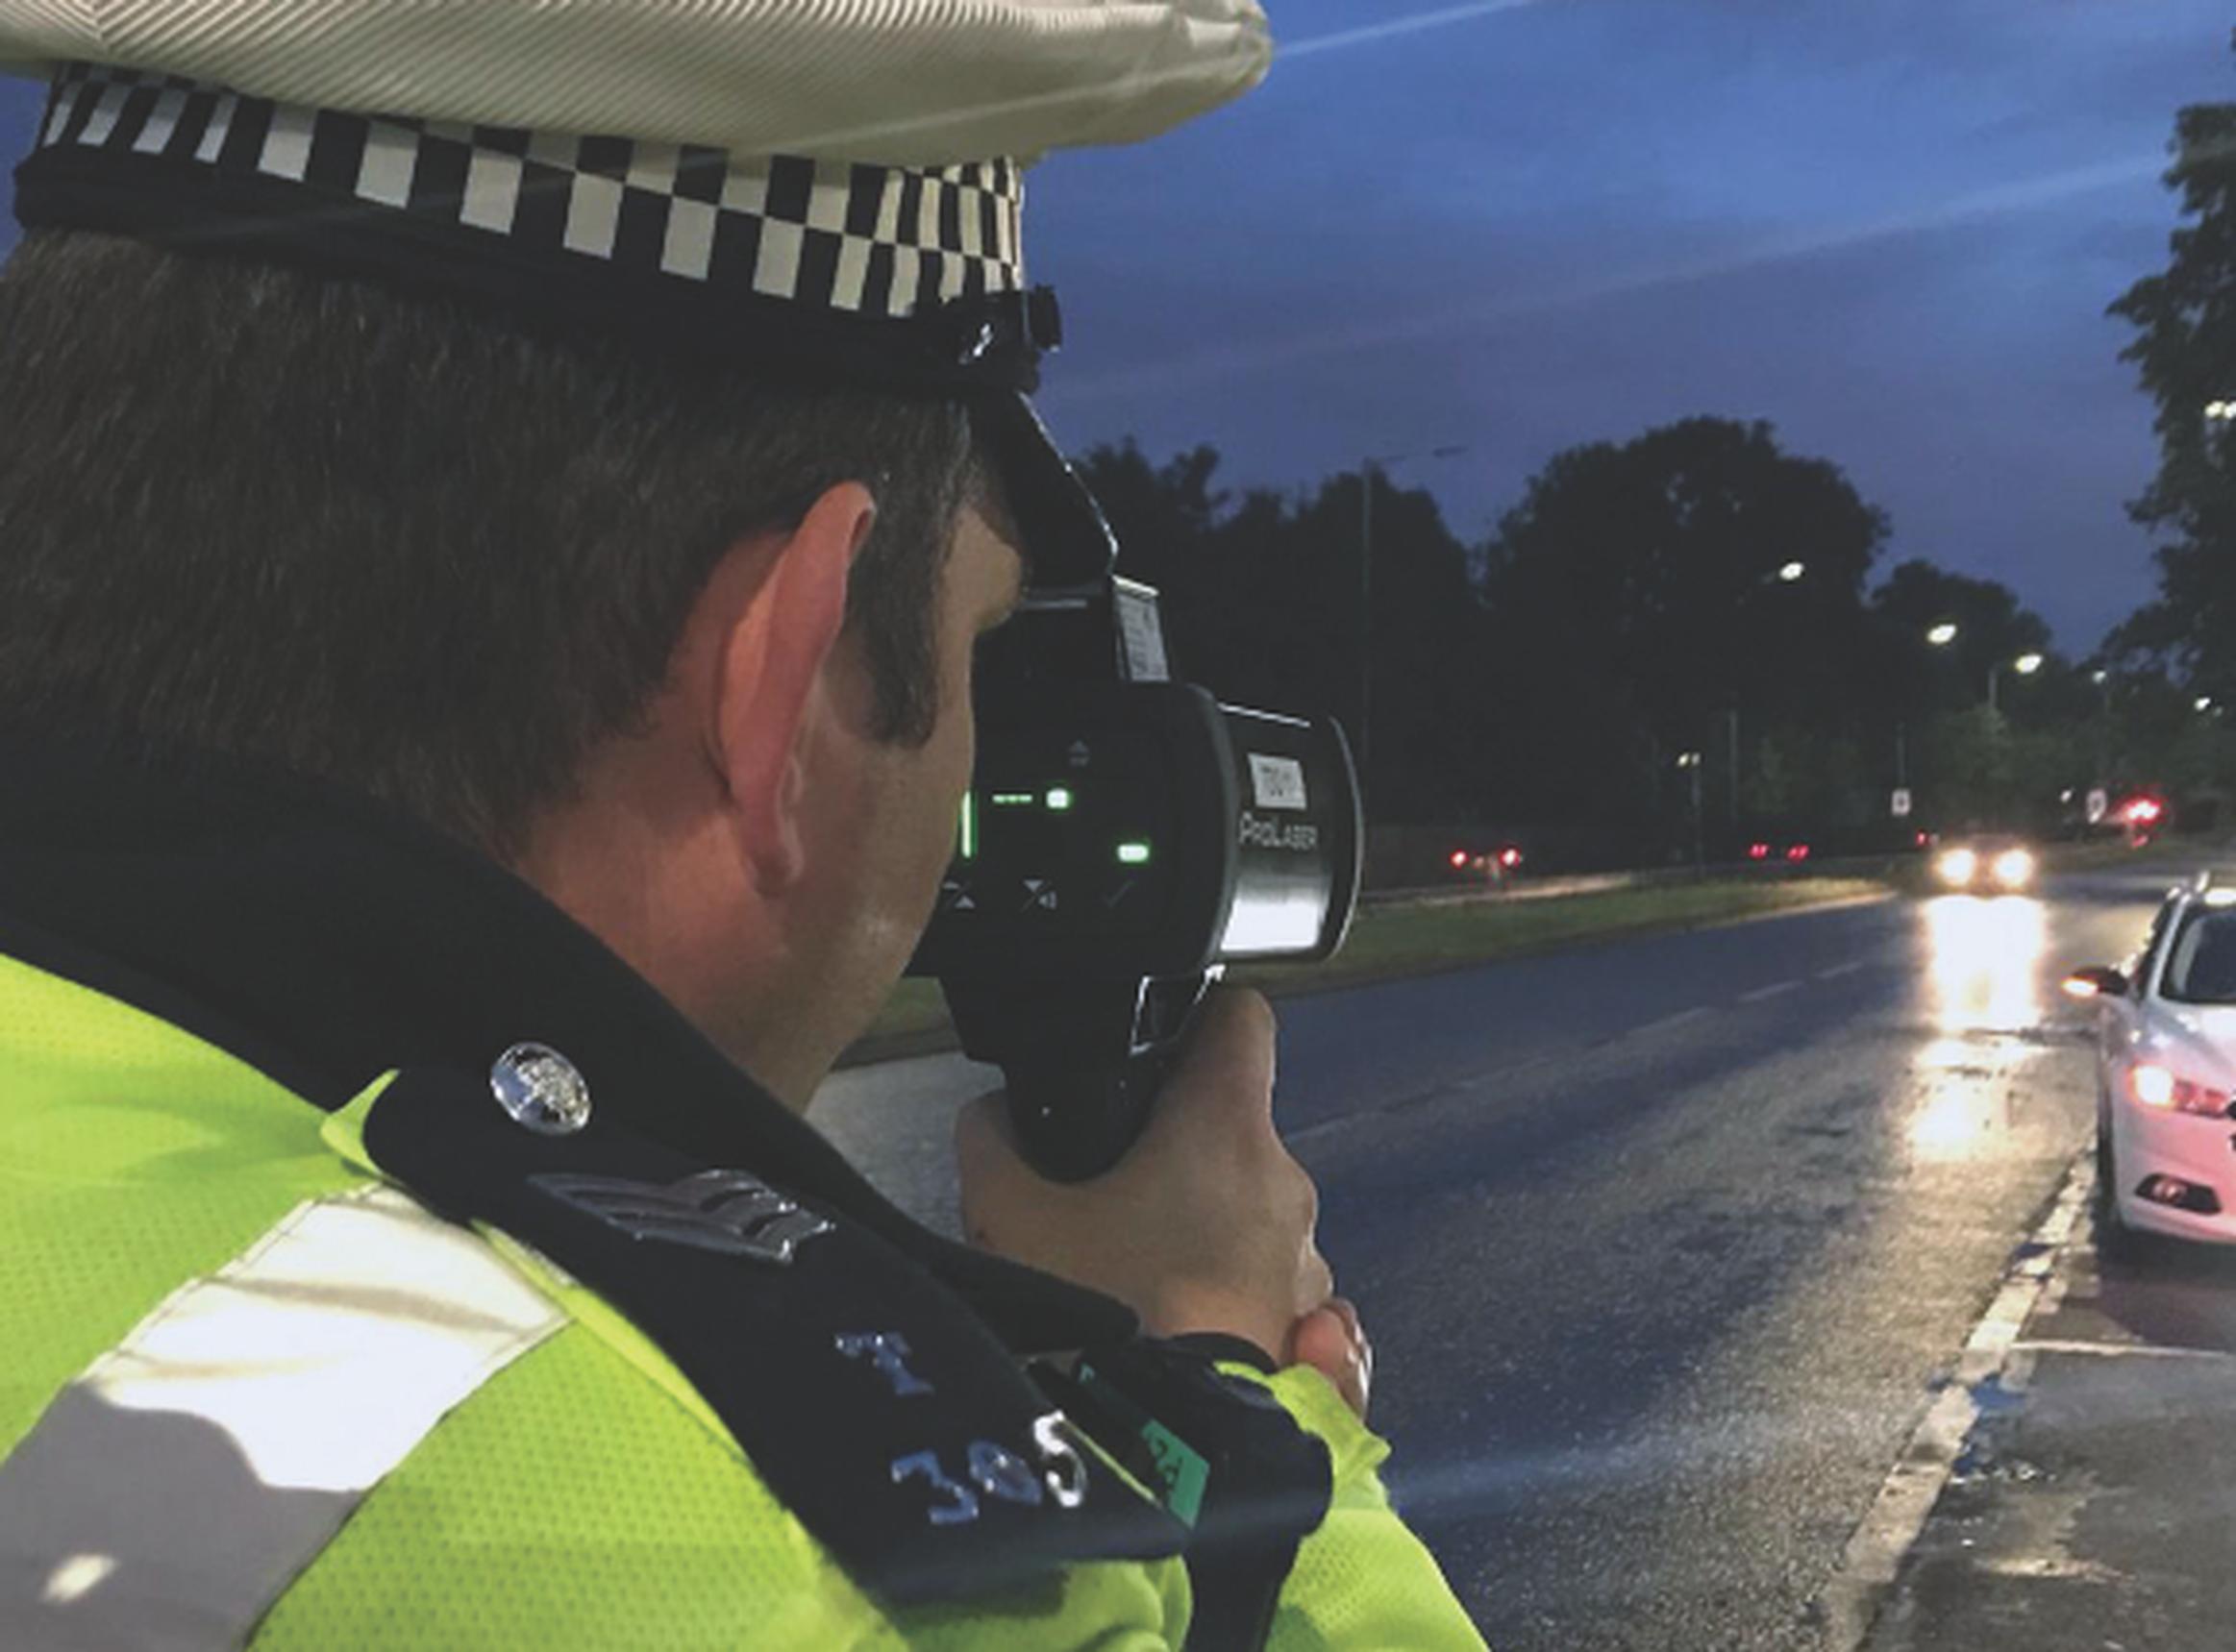 A Met police officer checking speeds on the A10